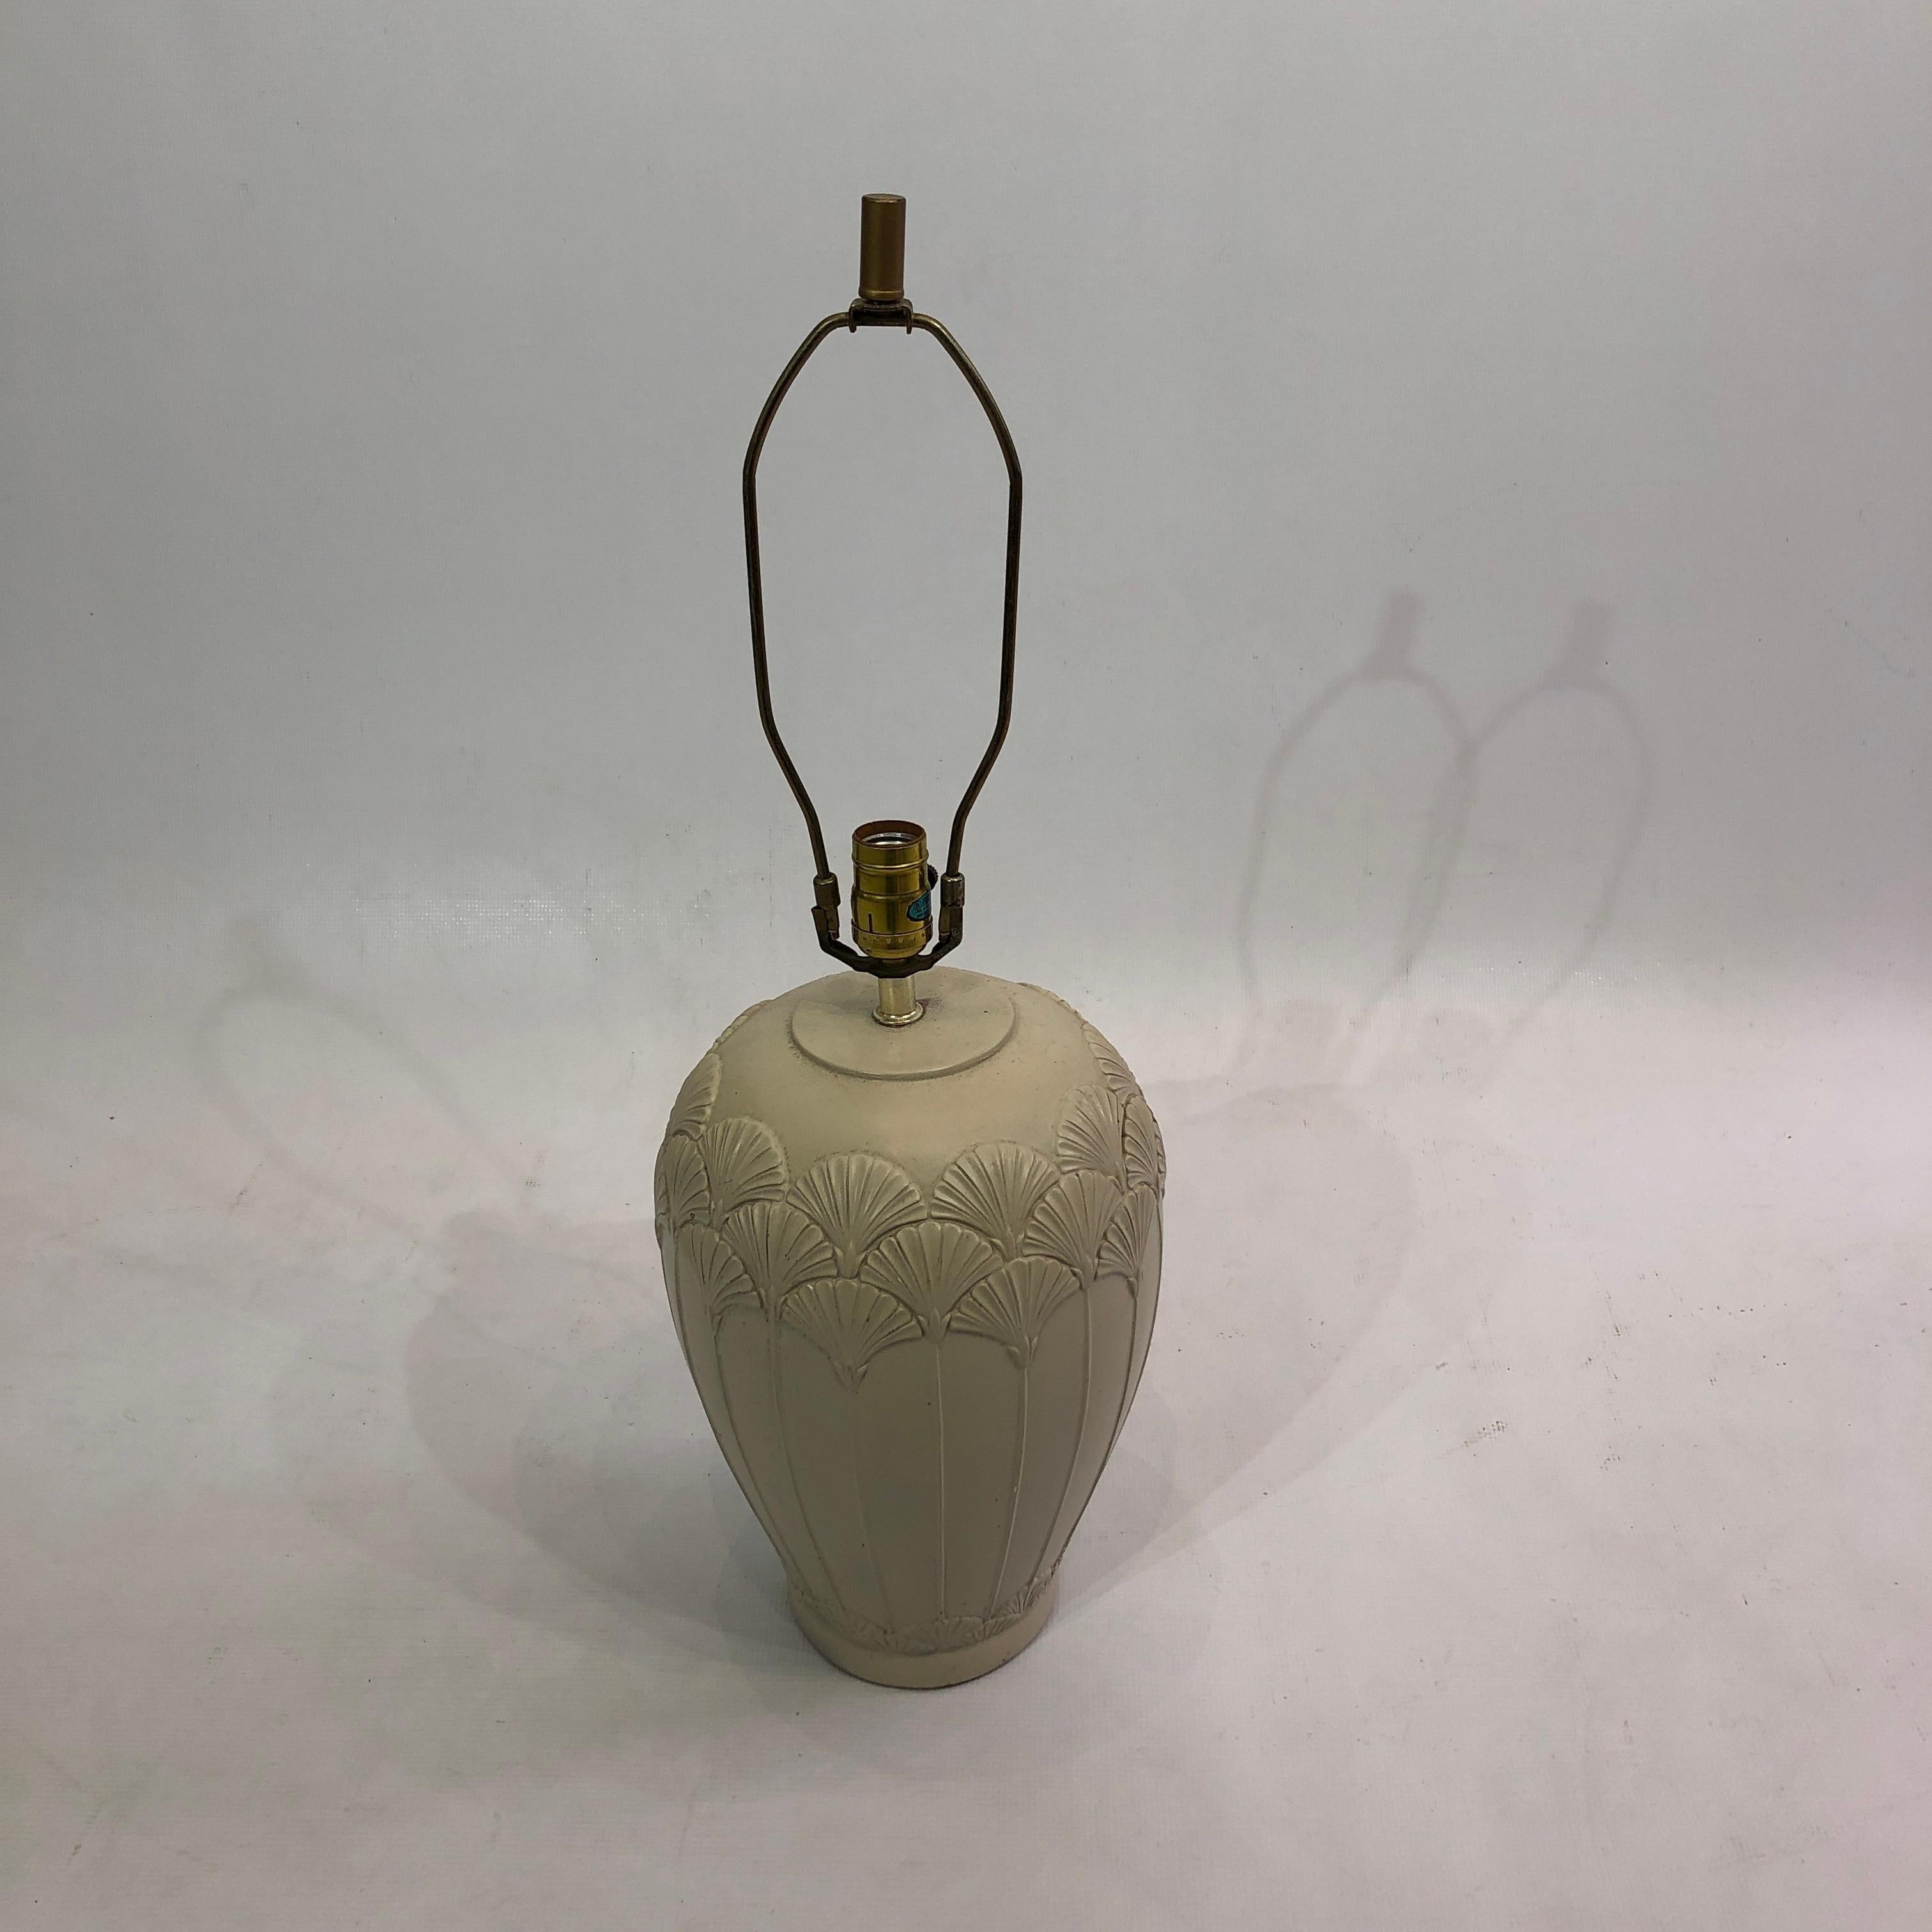 This Art Deco-inspired ceramic table lamp features an intricate shell pattern and comes in a faded cream colour. The lamp base is shaped like an urn, with a narrow bottom and heavier top. Protruding from this is an American style harp fitting for a